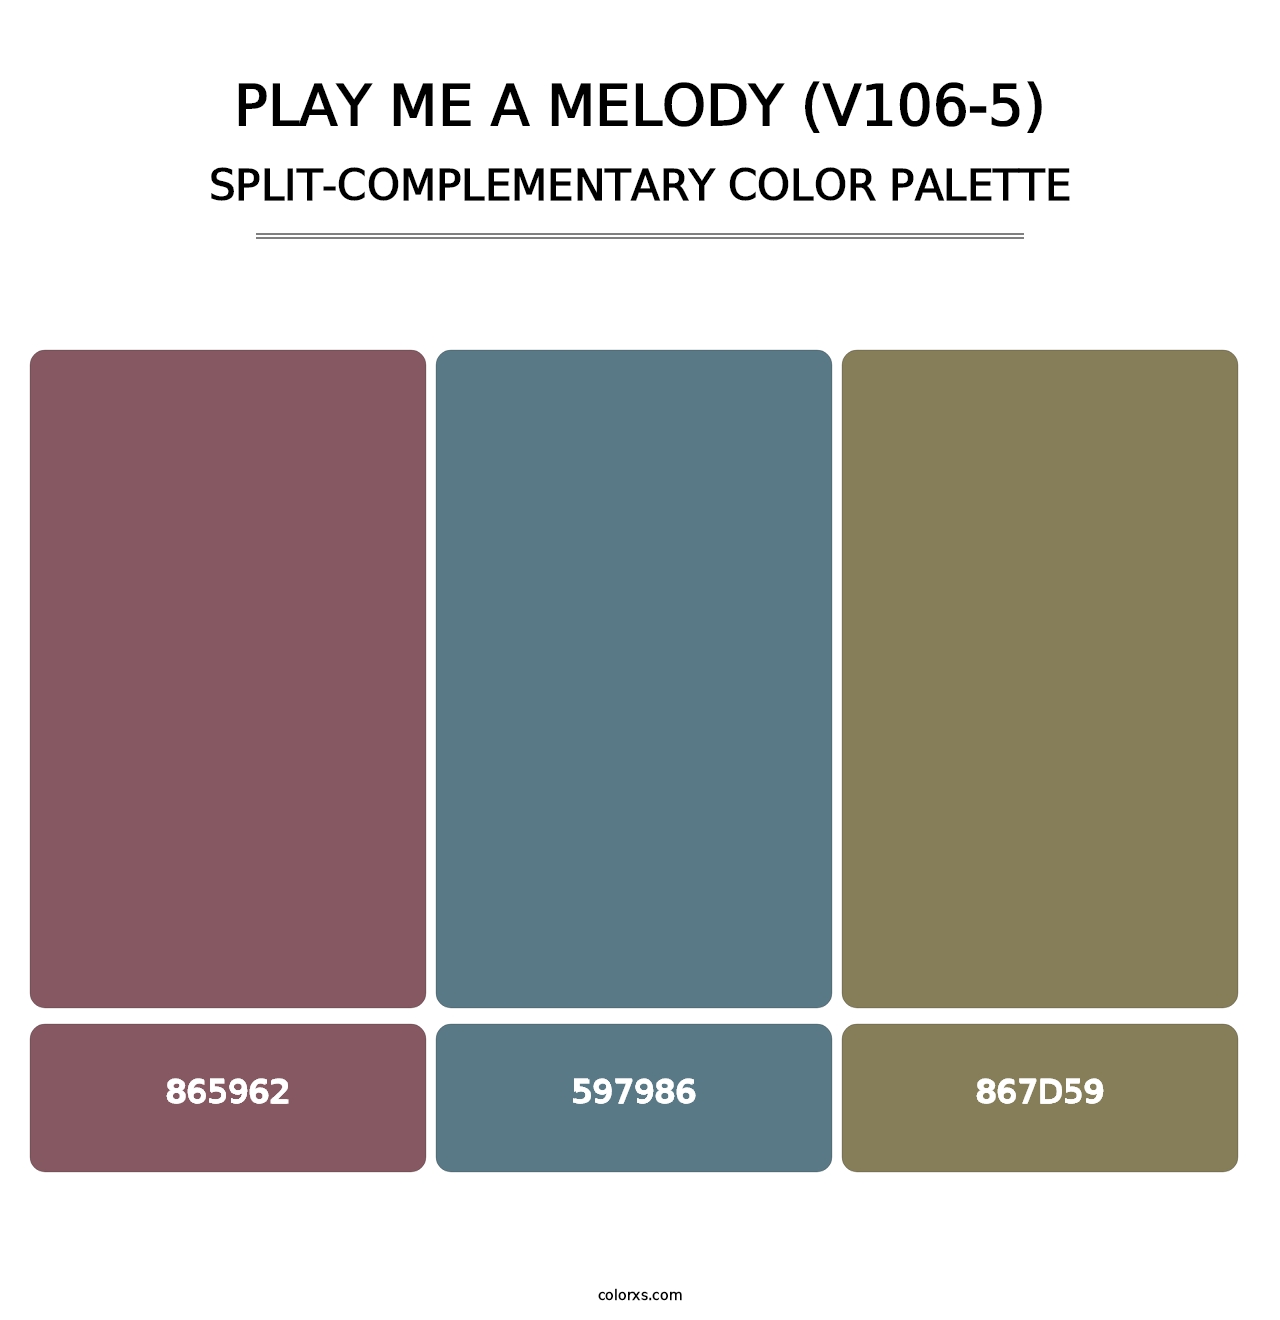 Play Me a Melody (V106-5) - Split-Complementary Color Palette